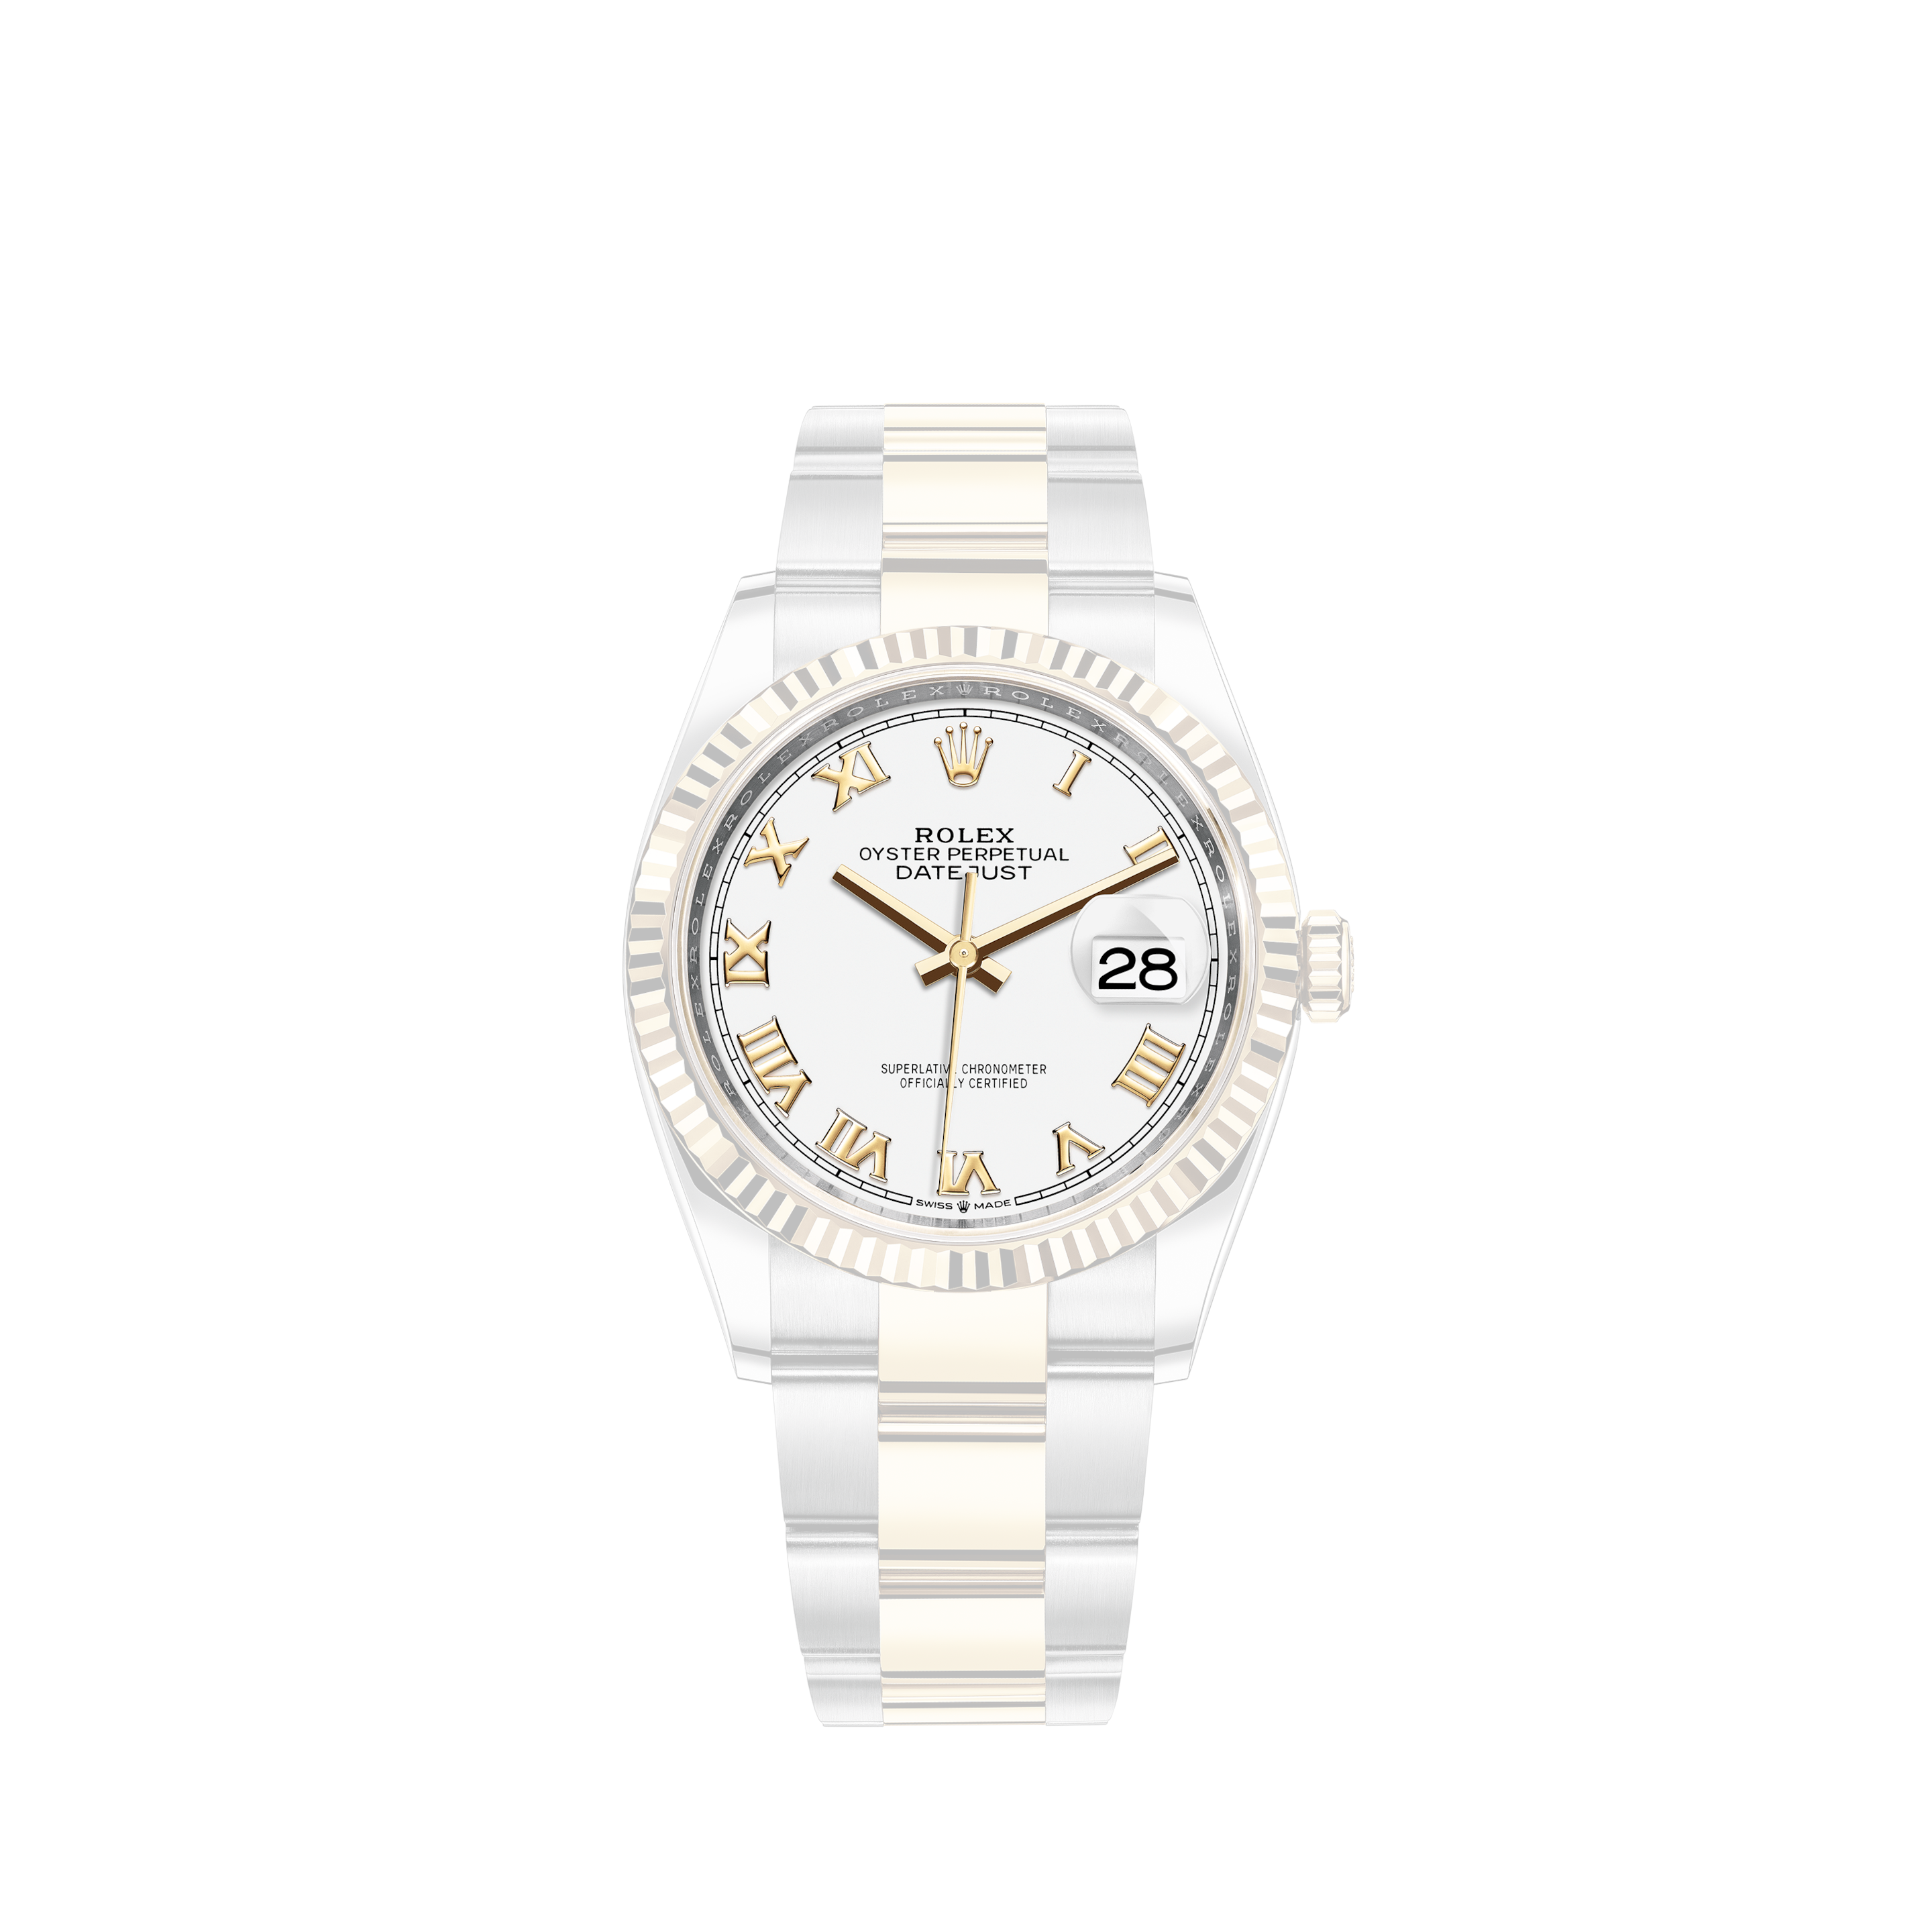 Rolex Ladies Rolex 26mm Datejust Two Tone Vintage Fluted Bezel With Lugs Champagne Gold Jubilee Roman Numeral DialRolex Ladies Rolex 26mm Datejust Two Tone Vintage Fluted Bezel With Lugs Chocolate Dial with Accent